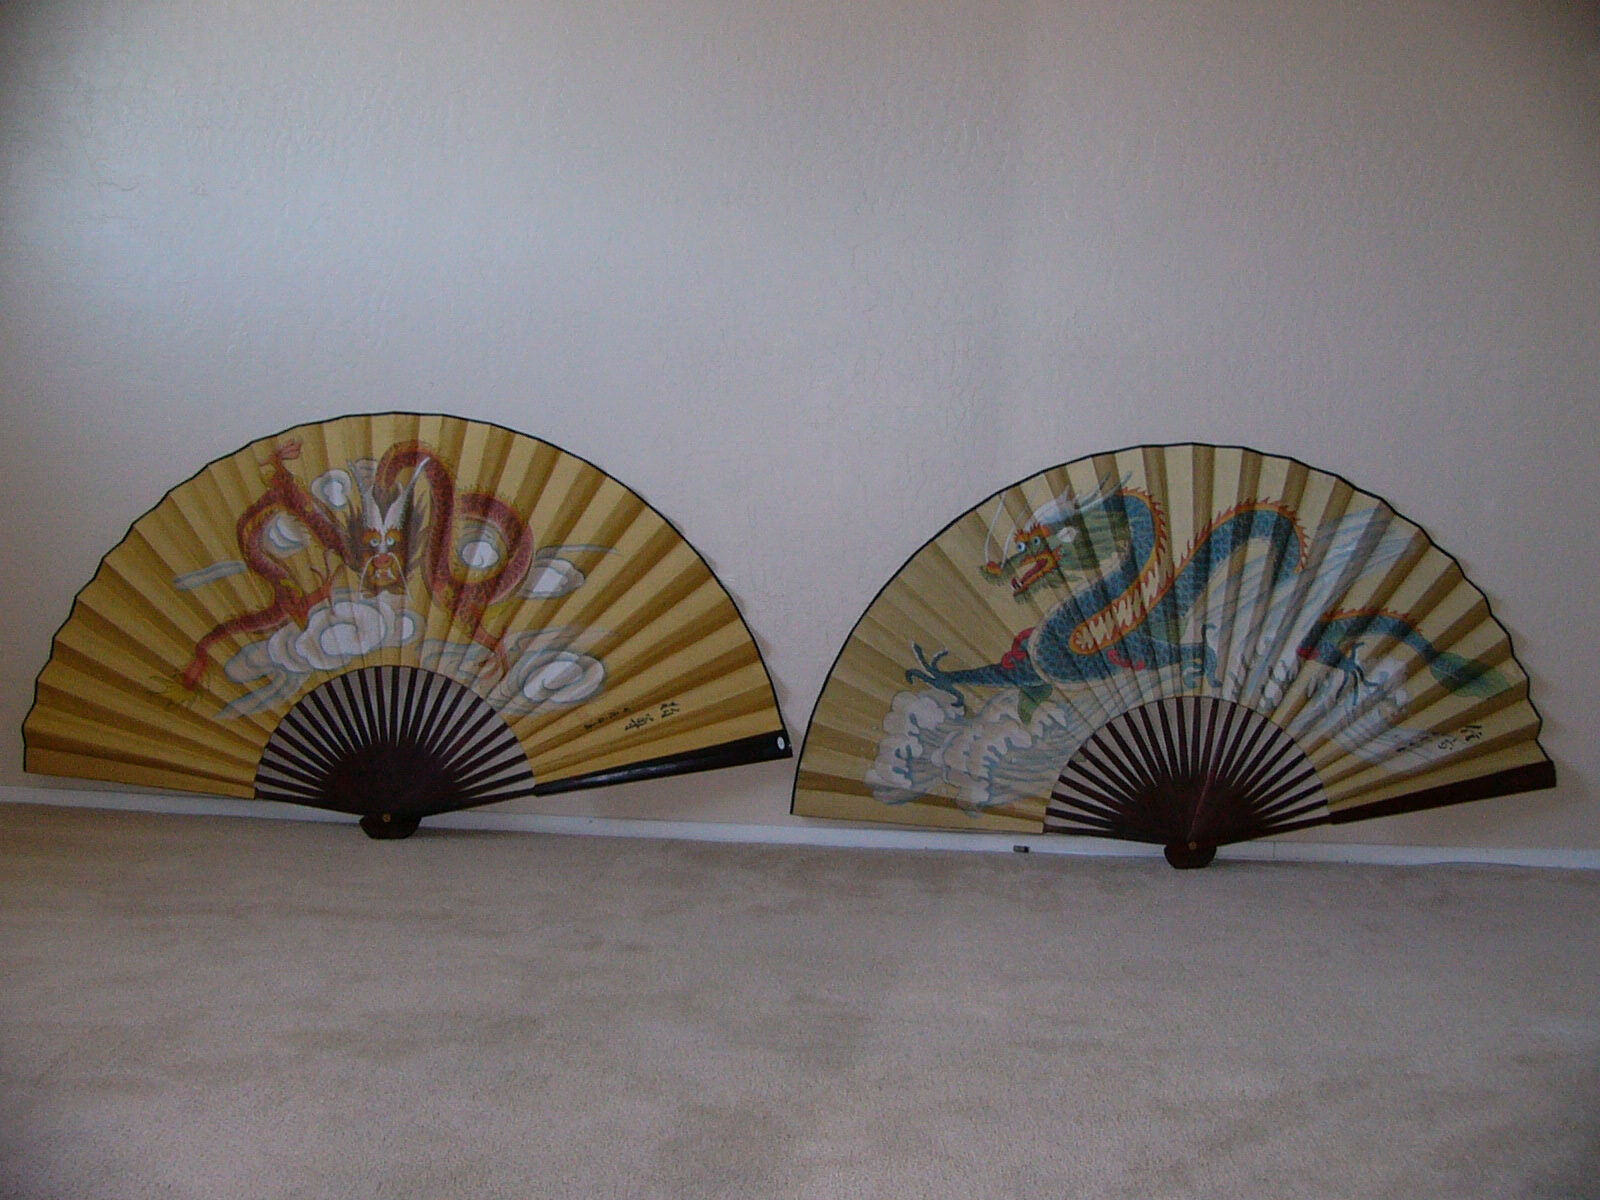 Two Large Vintage Hand Painted Chinese Wall Decor Dragon Fans Signed By Artists